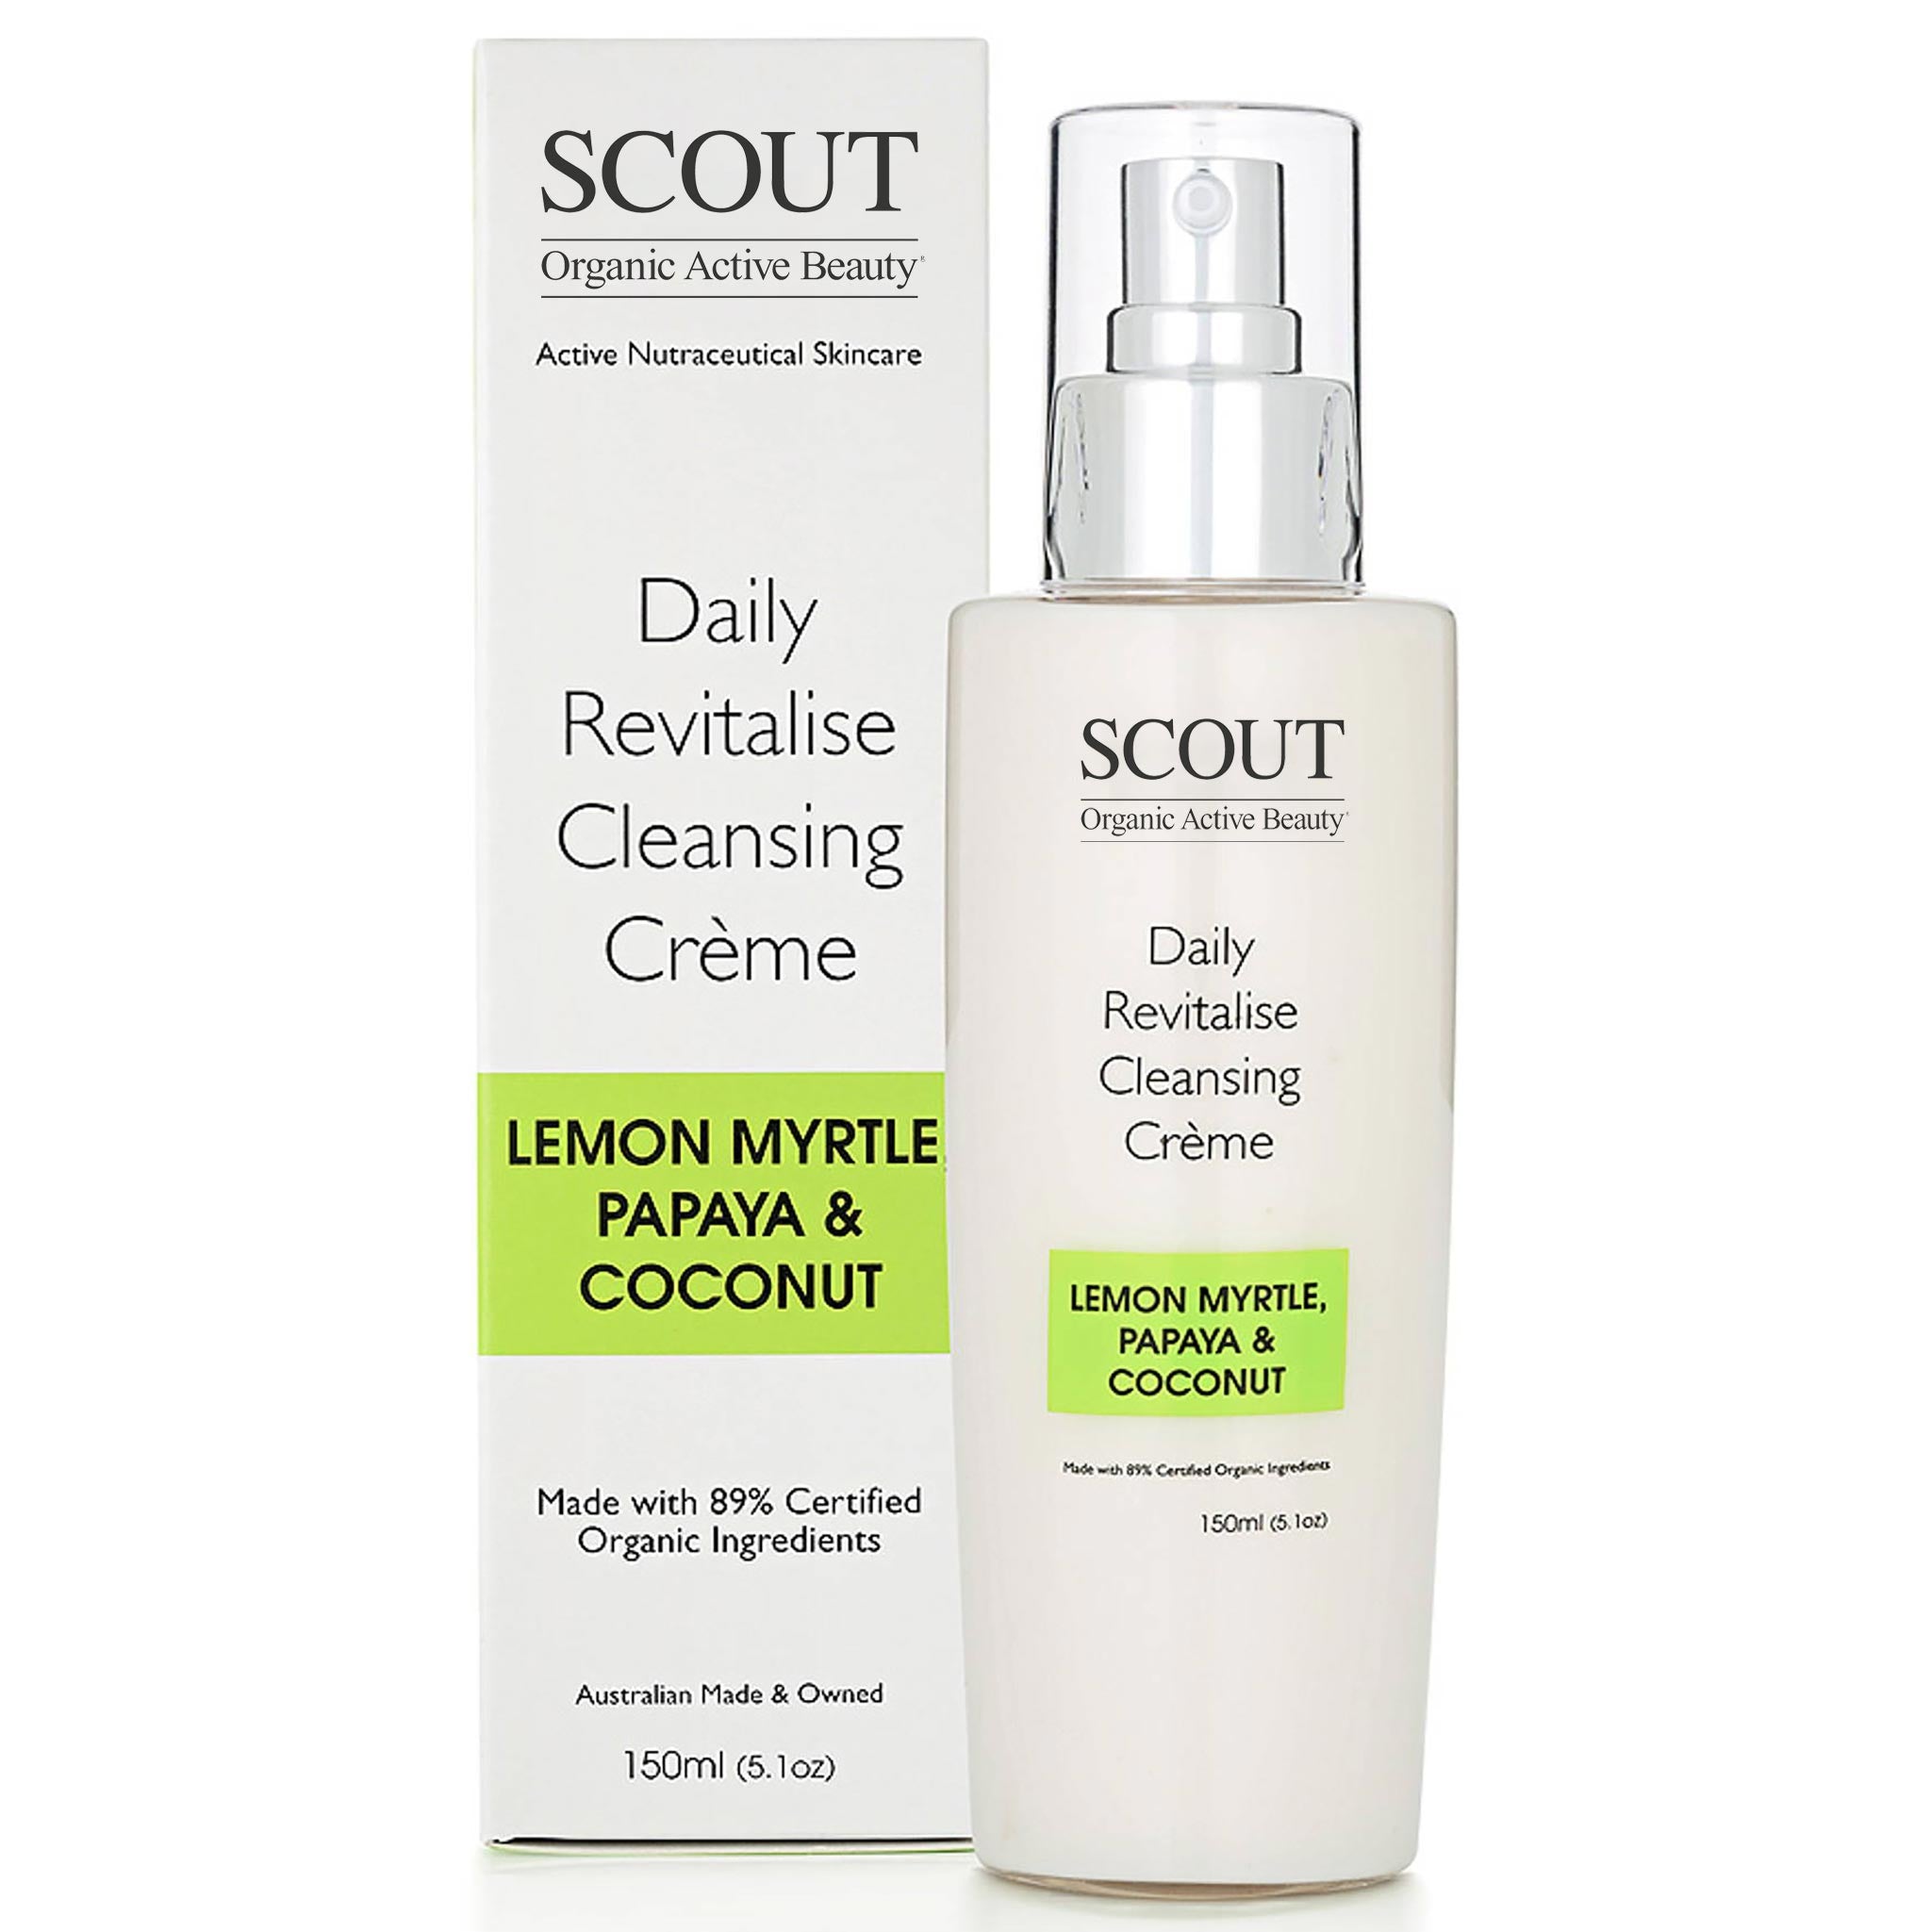 Daily Revitalise Cleansing Crème with Lemon Myrtle, Papaya and Coconut